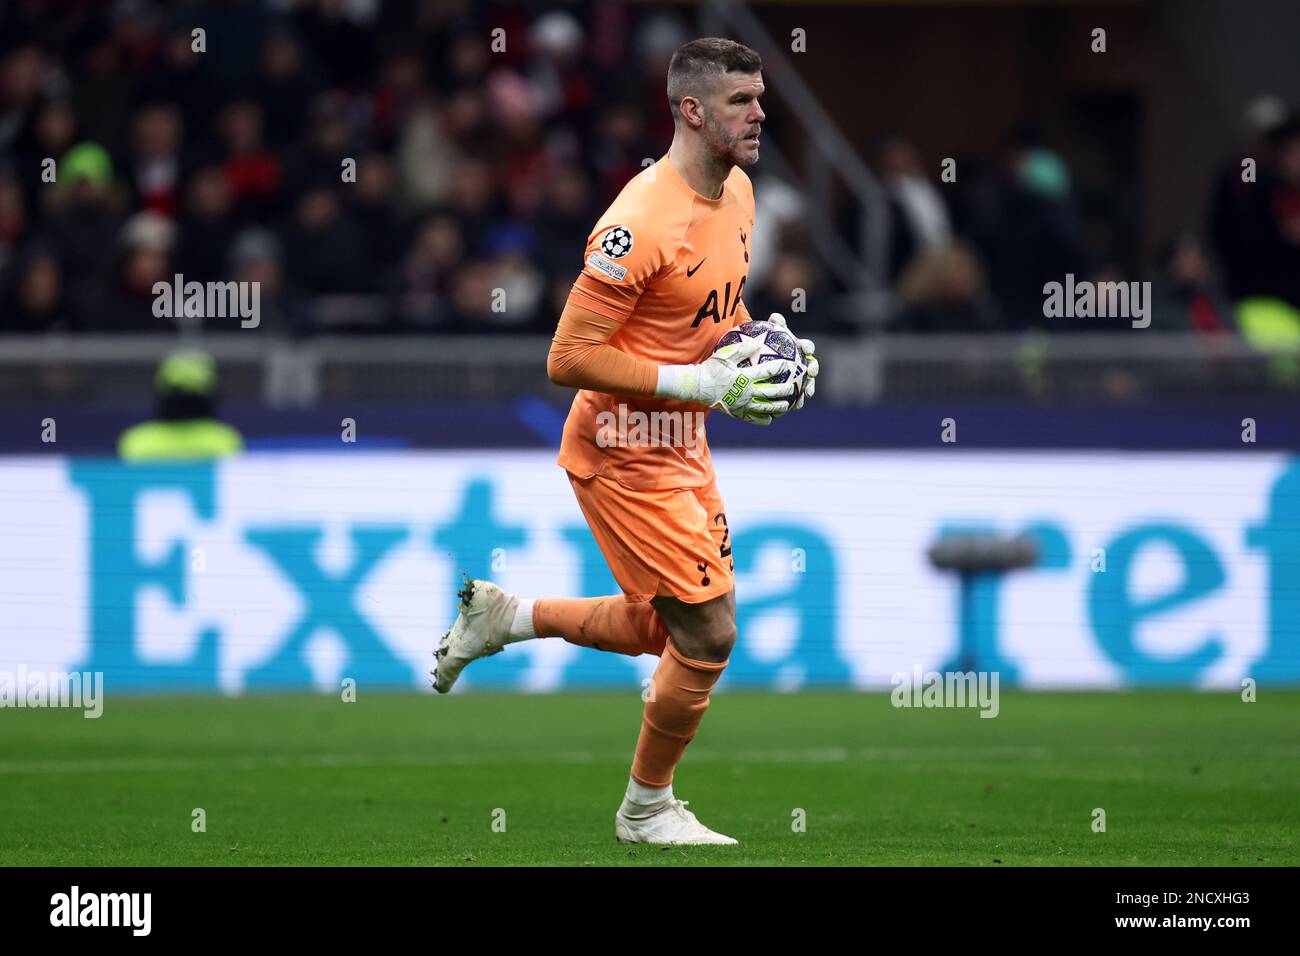 Milan, Italy. February 14, 2023, Fraser Forster of Tottenham Hotspur Fc controls the ball during the UEFA Champions League round of 16 leg one match between AC Milan and Tottenham Hotspur at Giuseppe Meazza Stadium on February 14, 2023 in Milan, Italy. Stock Photo